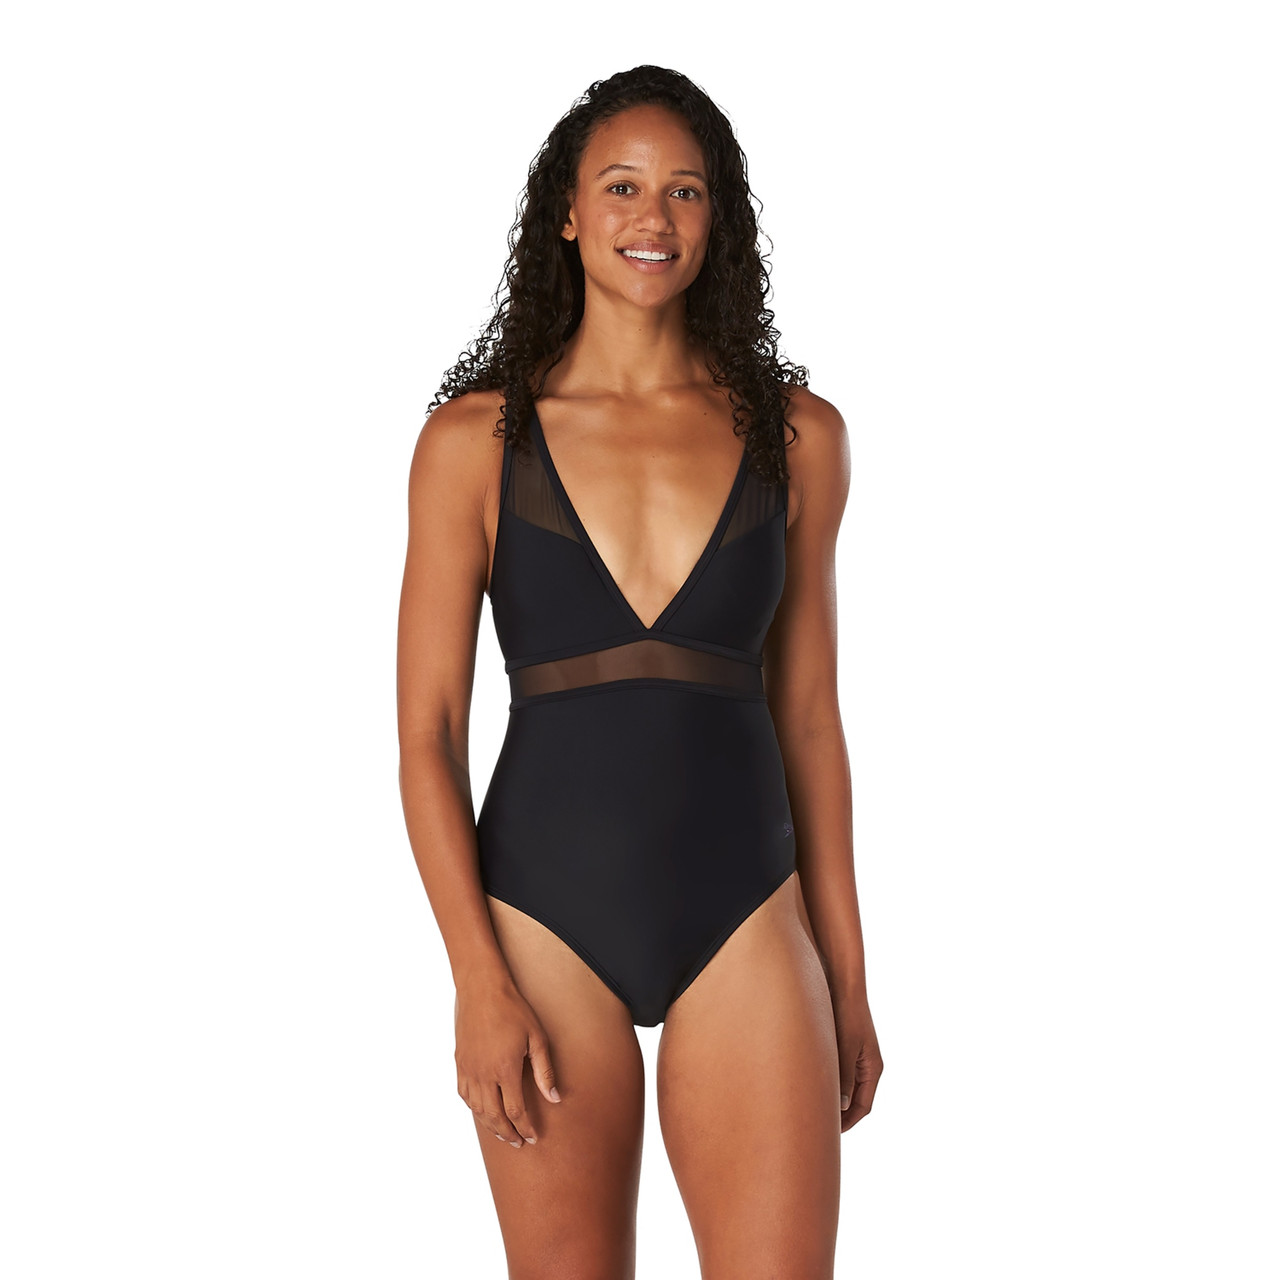 Shop Sales On Women's Bathing Suits, Athletic Bikinis, One Piece